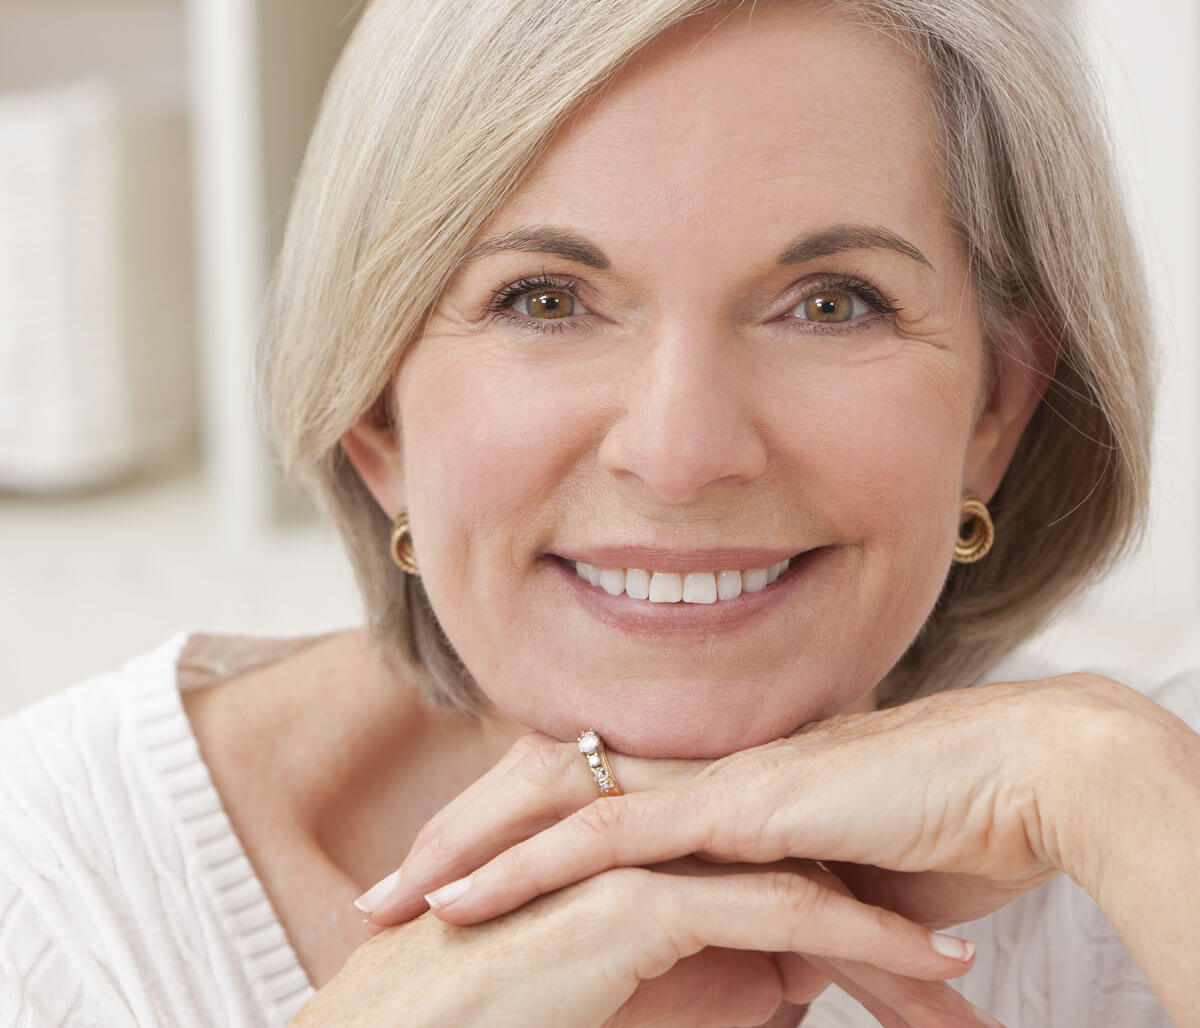 Using partial dentures in our office near Normal, IL, we promote healthy, beautiful smiles